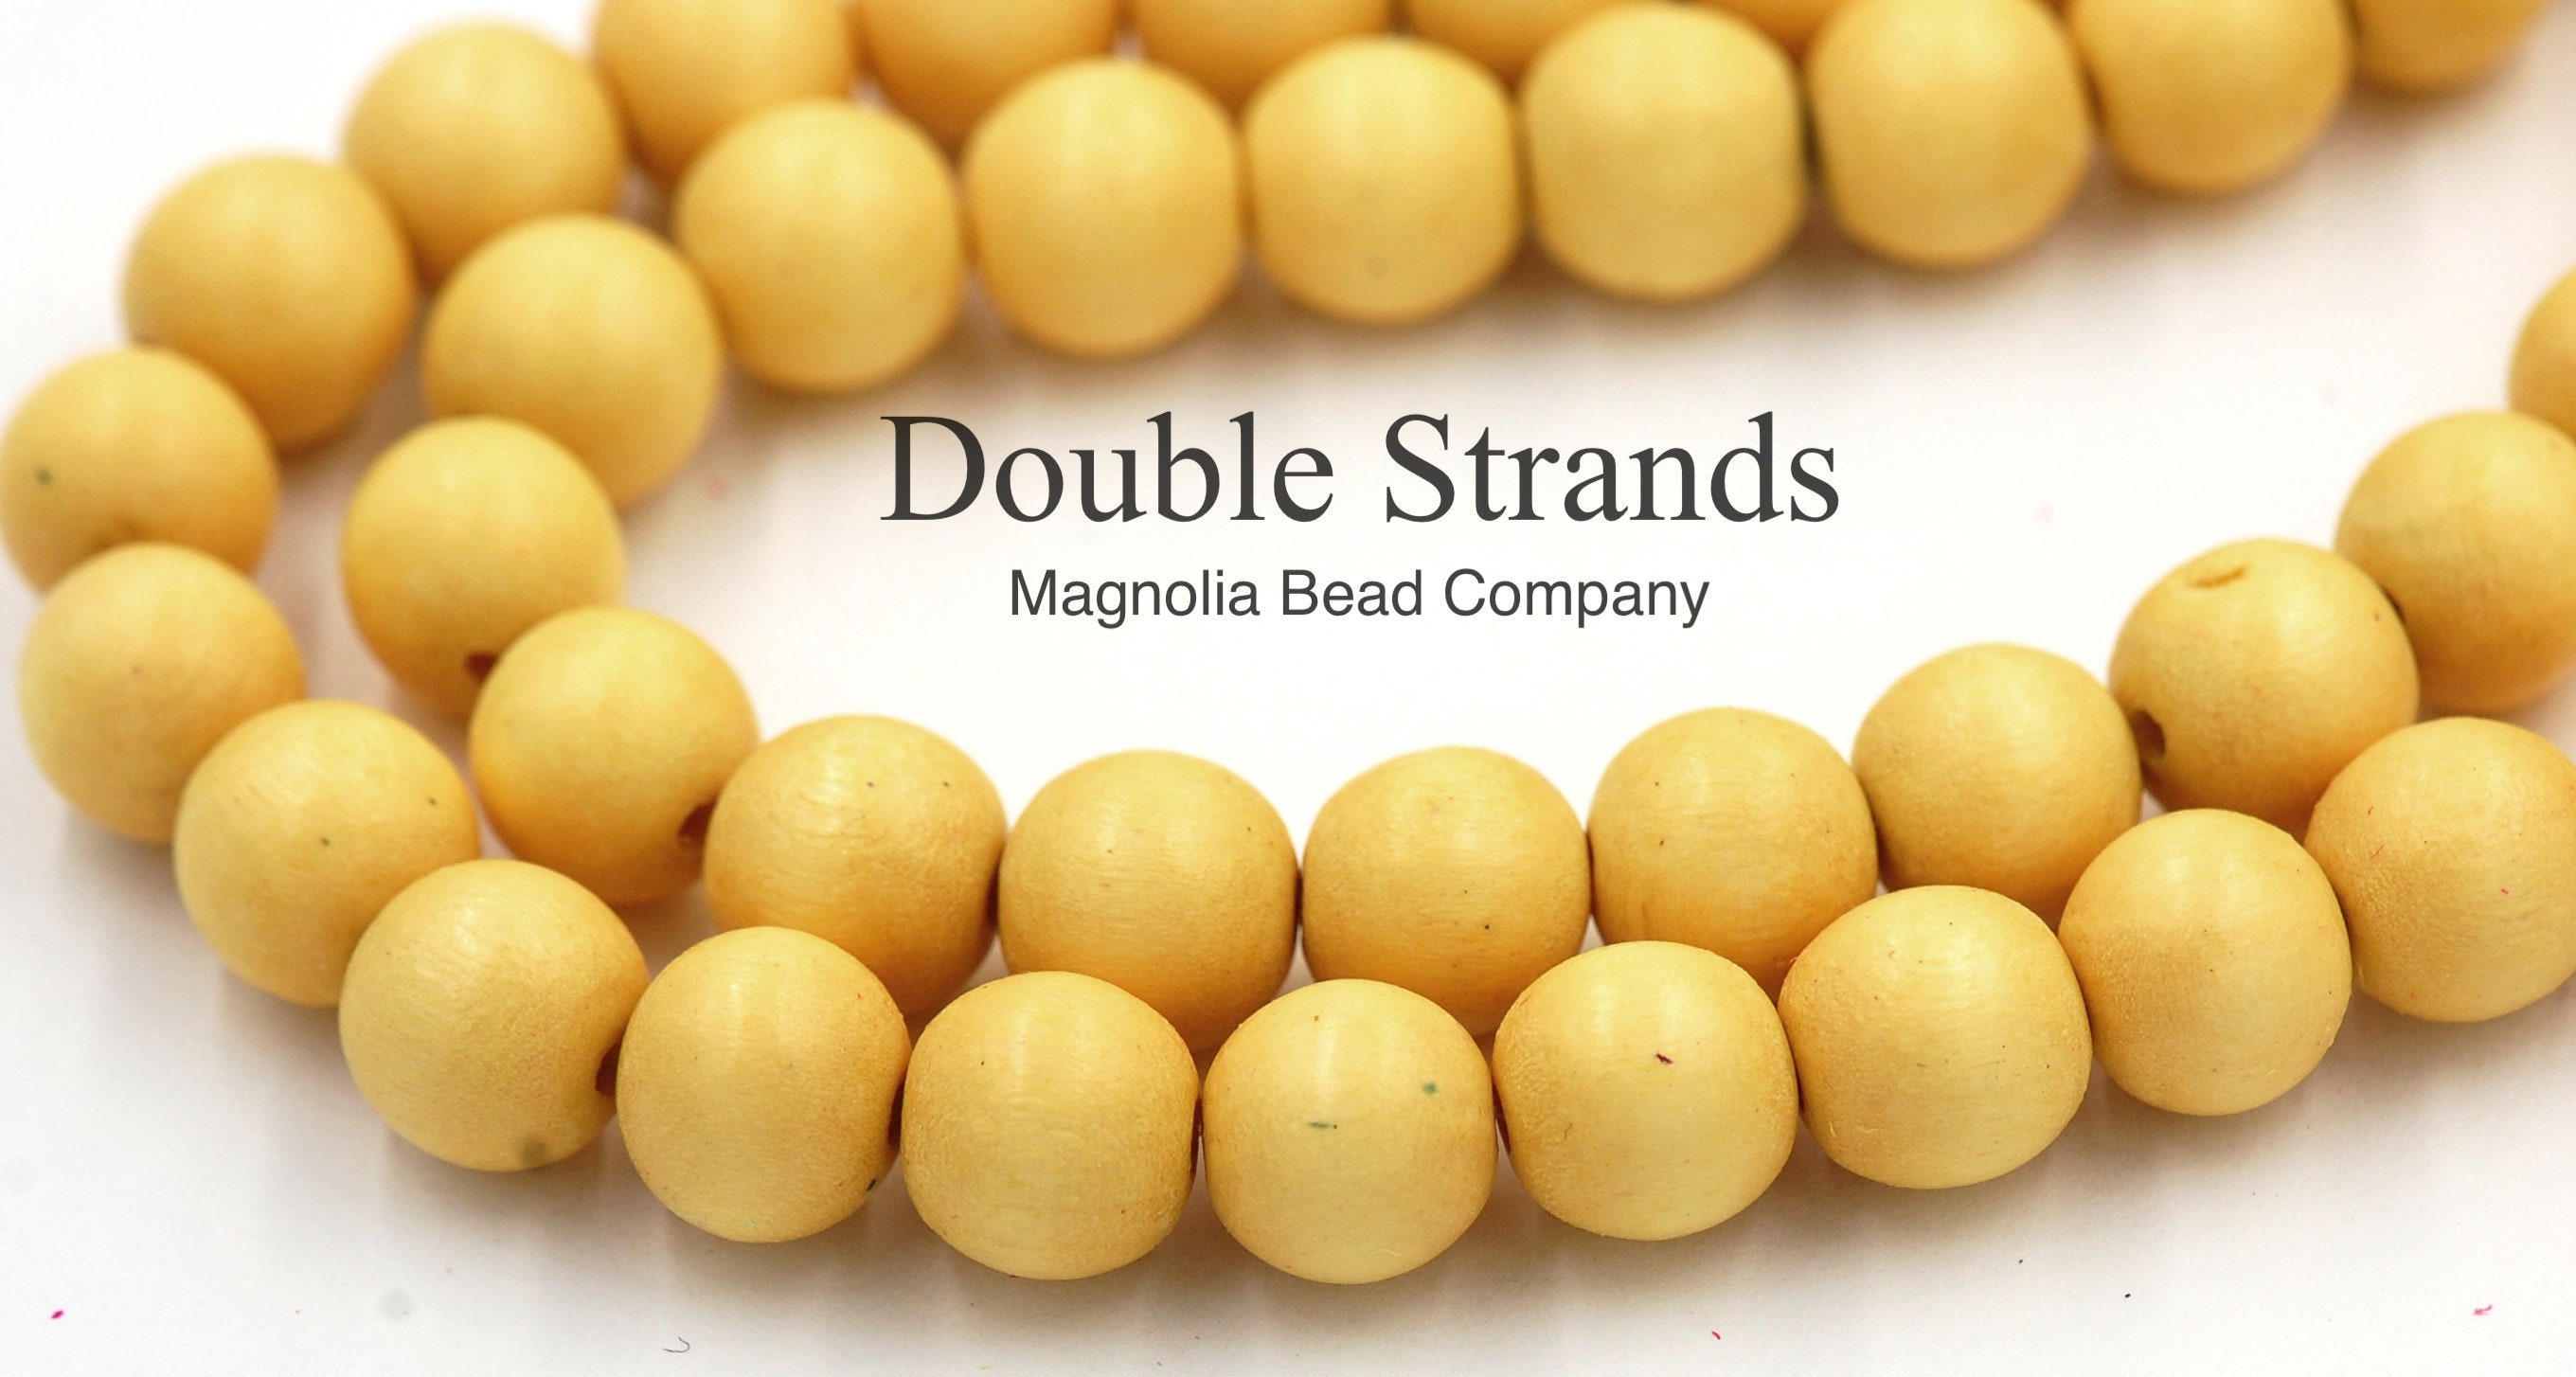 6mm Round Yellow Wooden Beads for Crafts Waxed Dyed Natural 